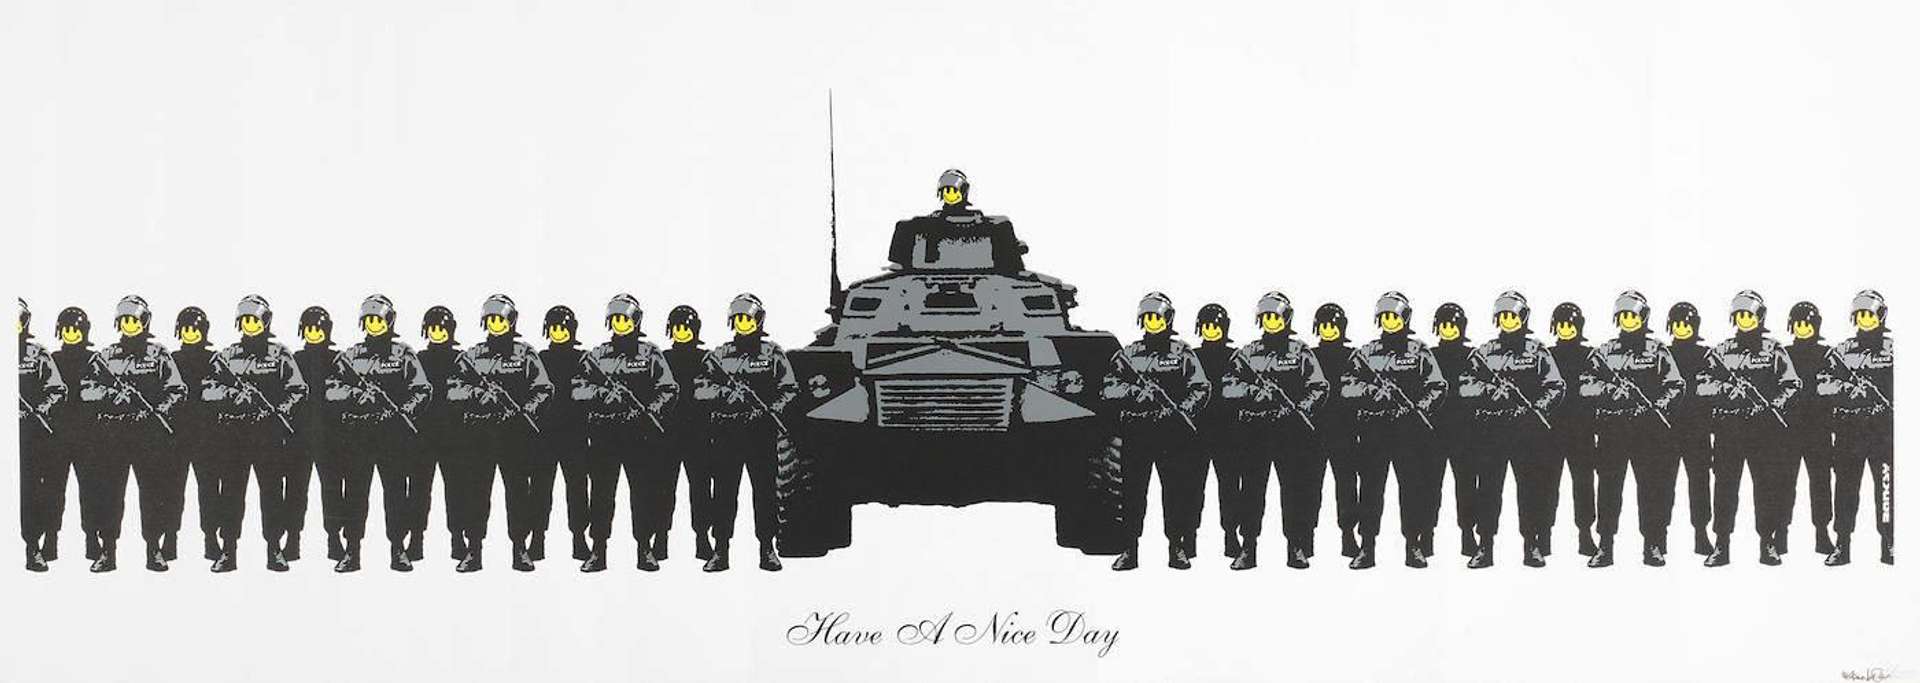 This landscape piece by Banksy depicts almost thirty military or riot police lined up from left to right, in the middle of them a large military tank, loaded with ammunition. The officers have their faces obscured by a yellow ‘acid-house’ smiley face.